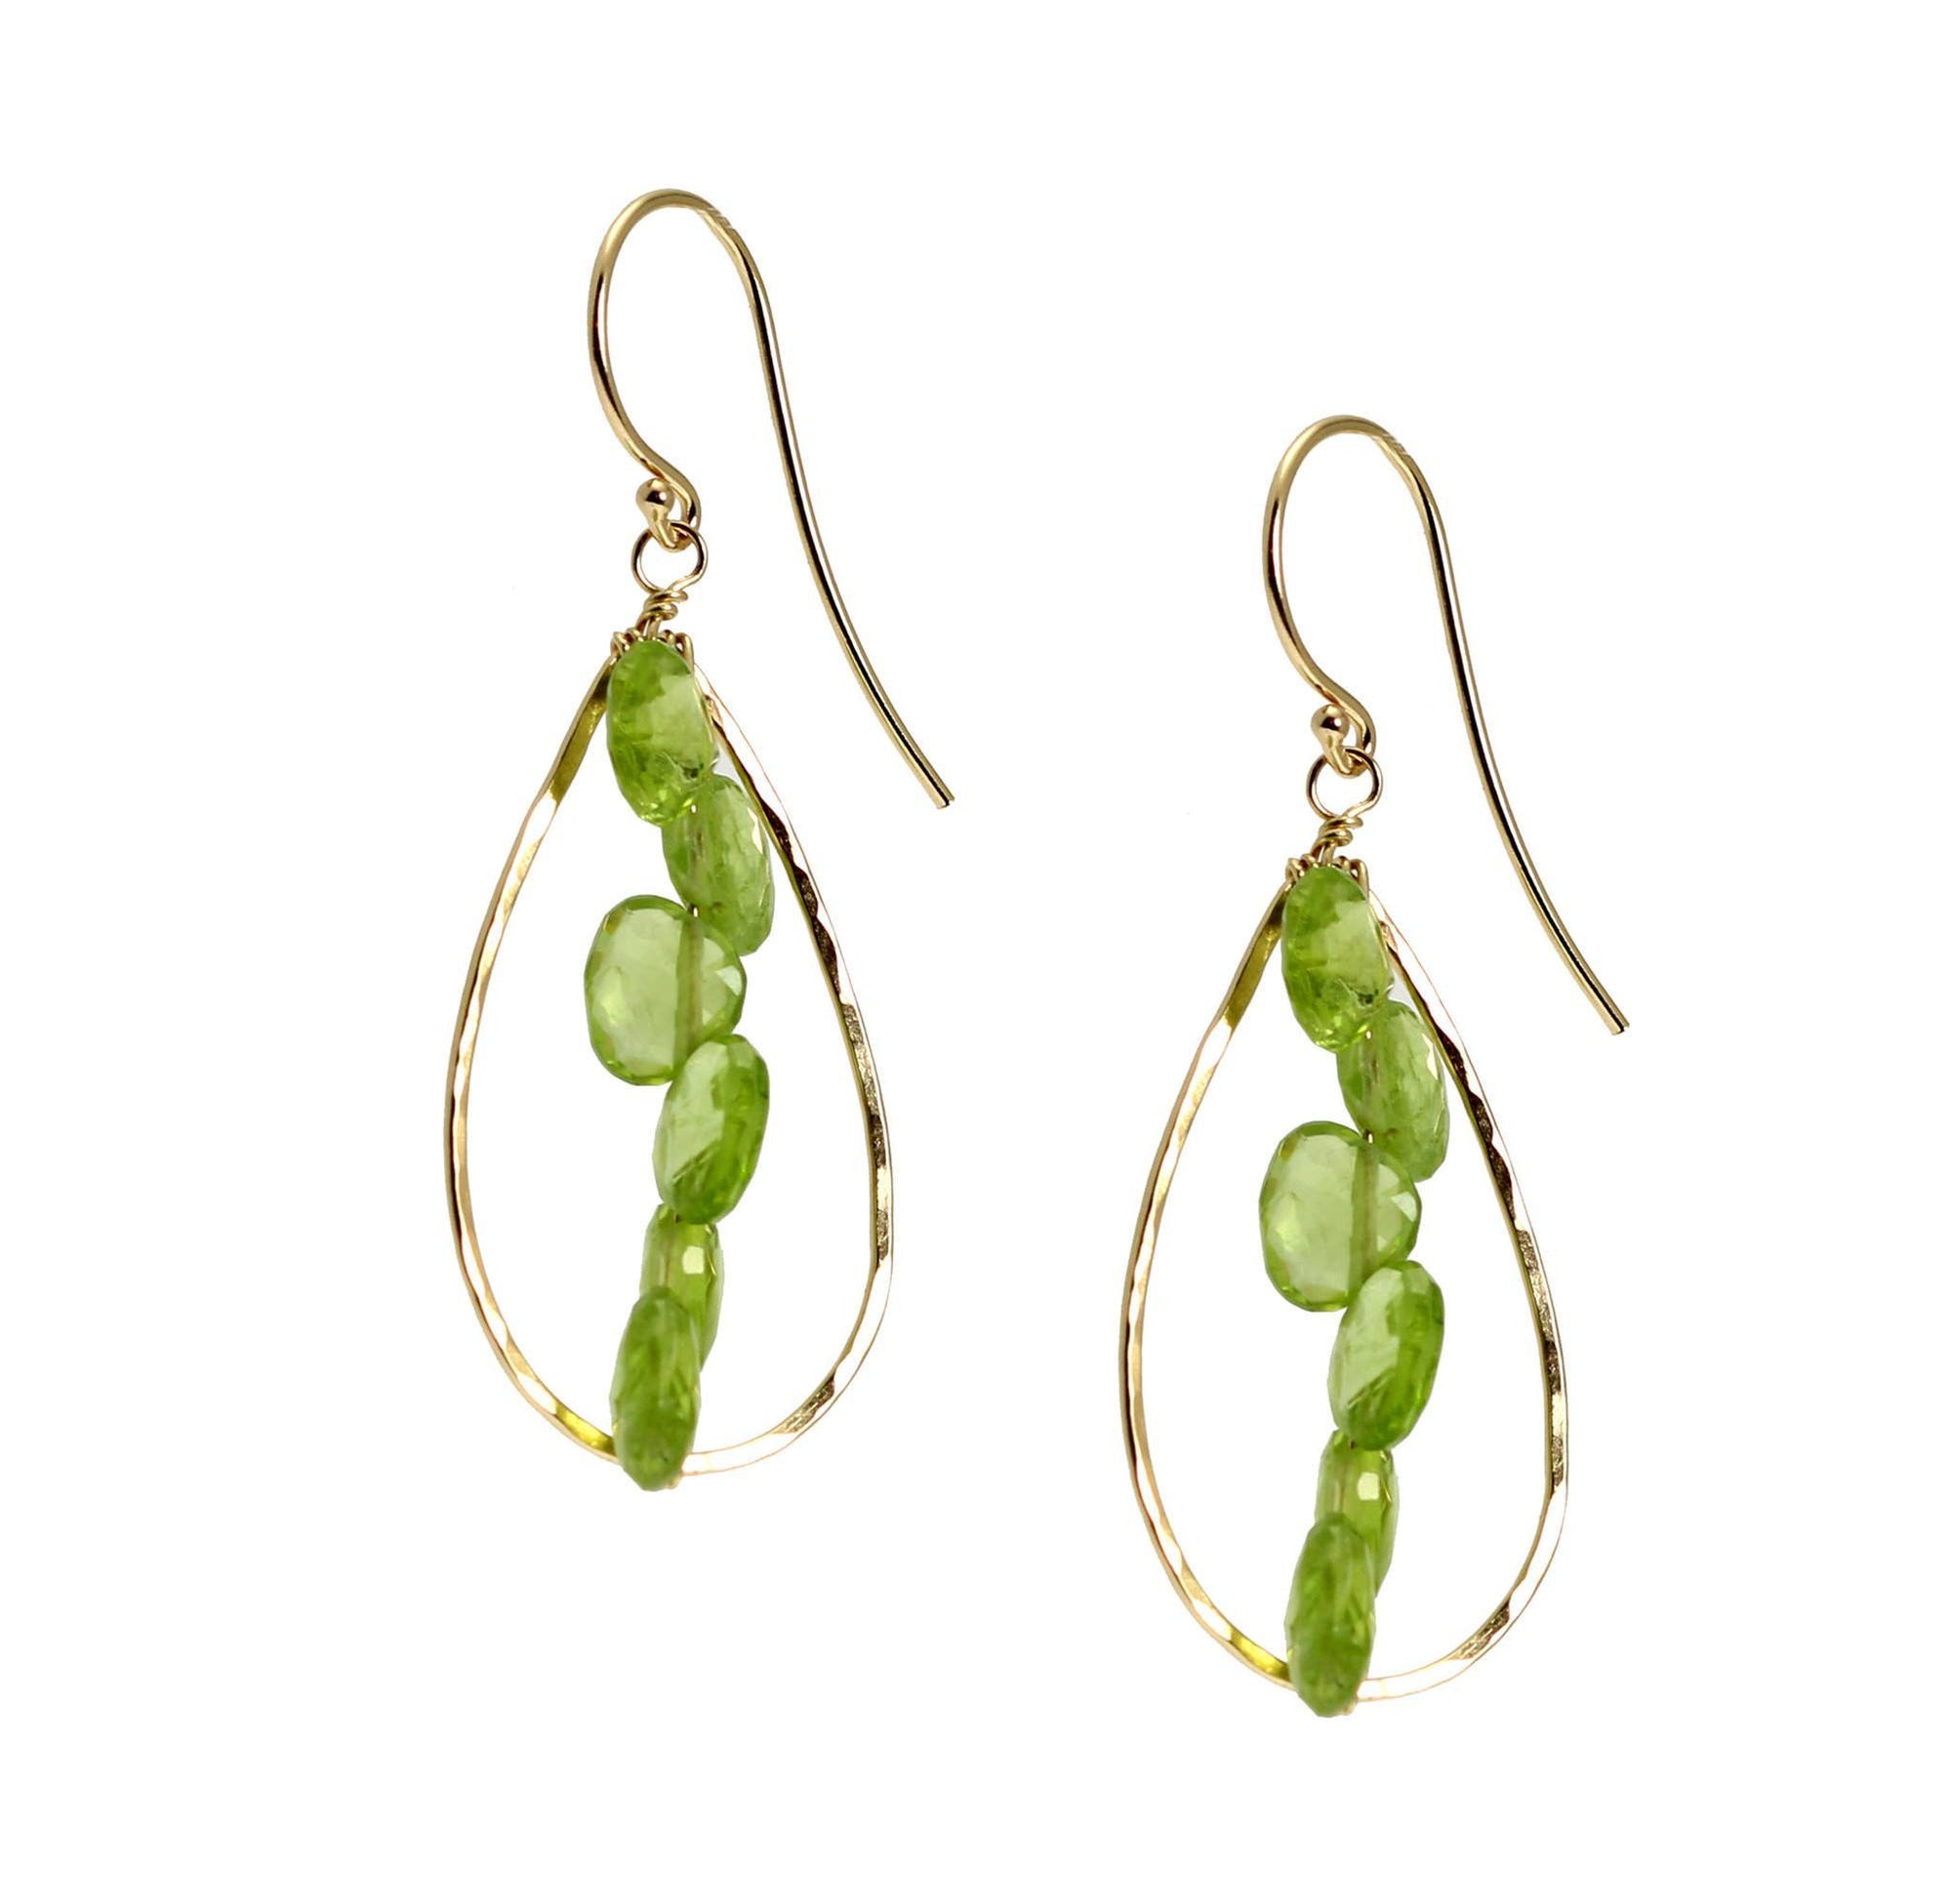 Close Up - 14K Gold Hammered Tear Drop Earrings With Peridot